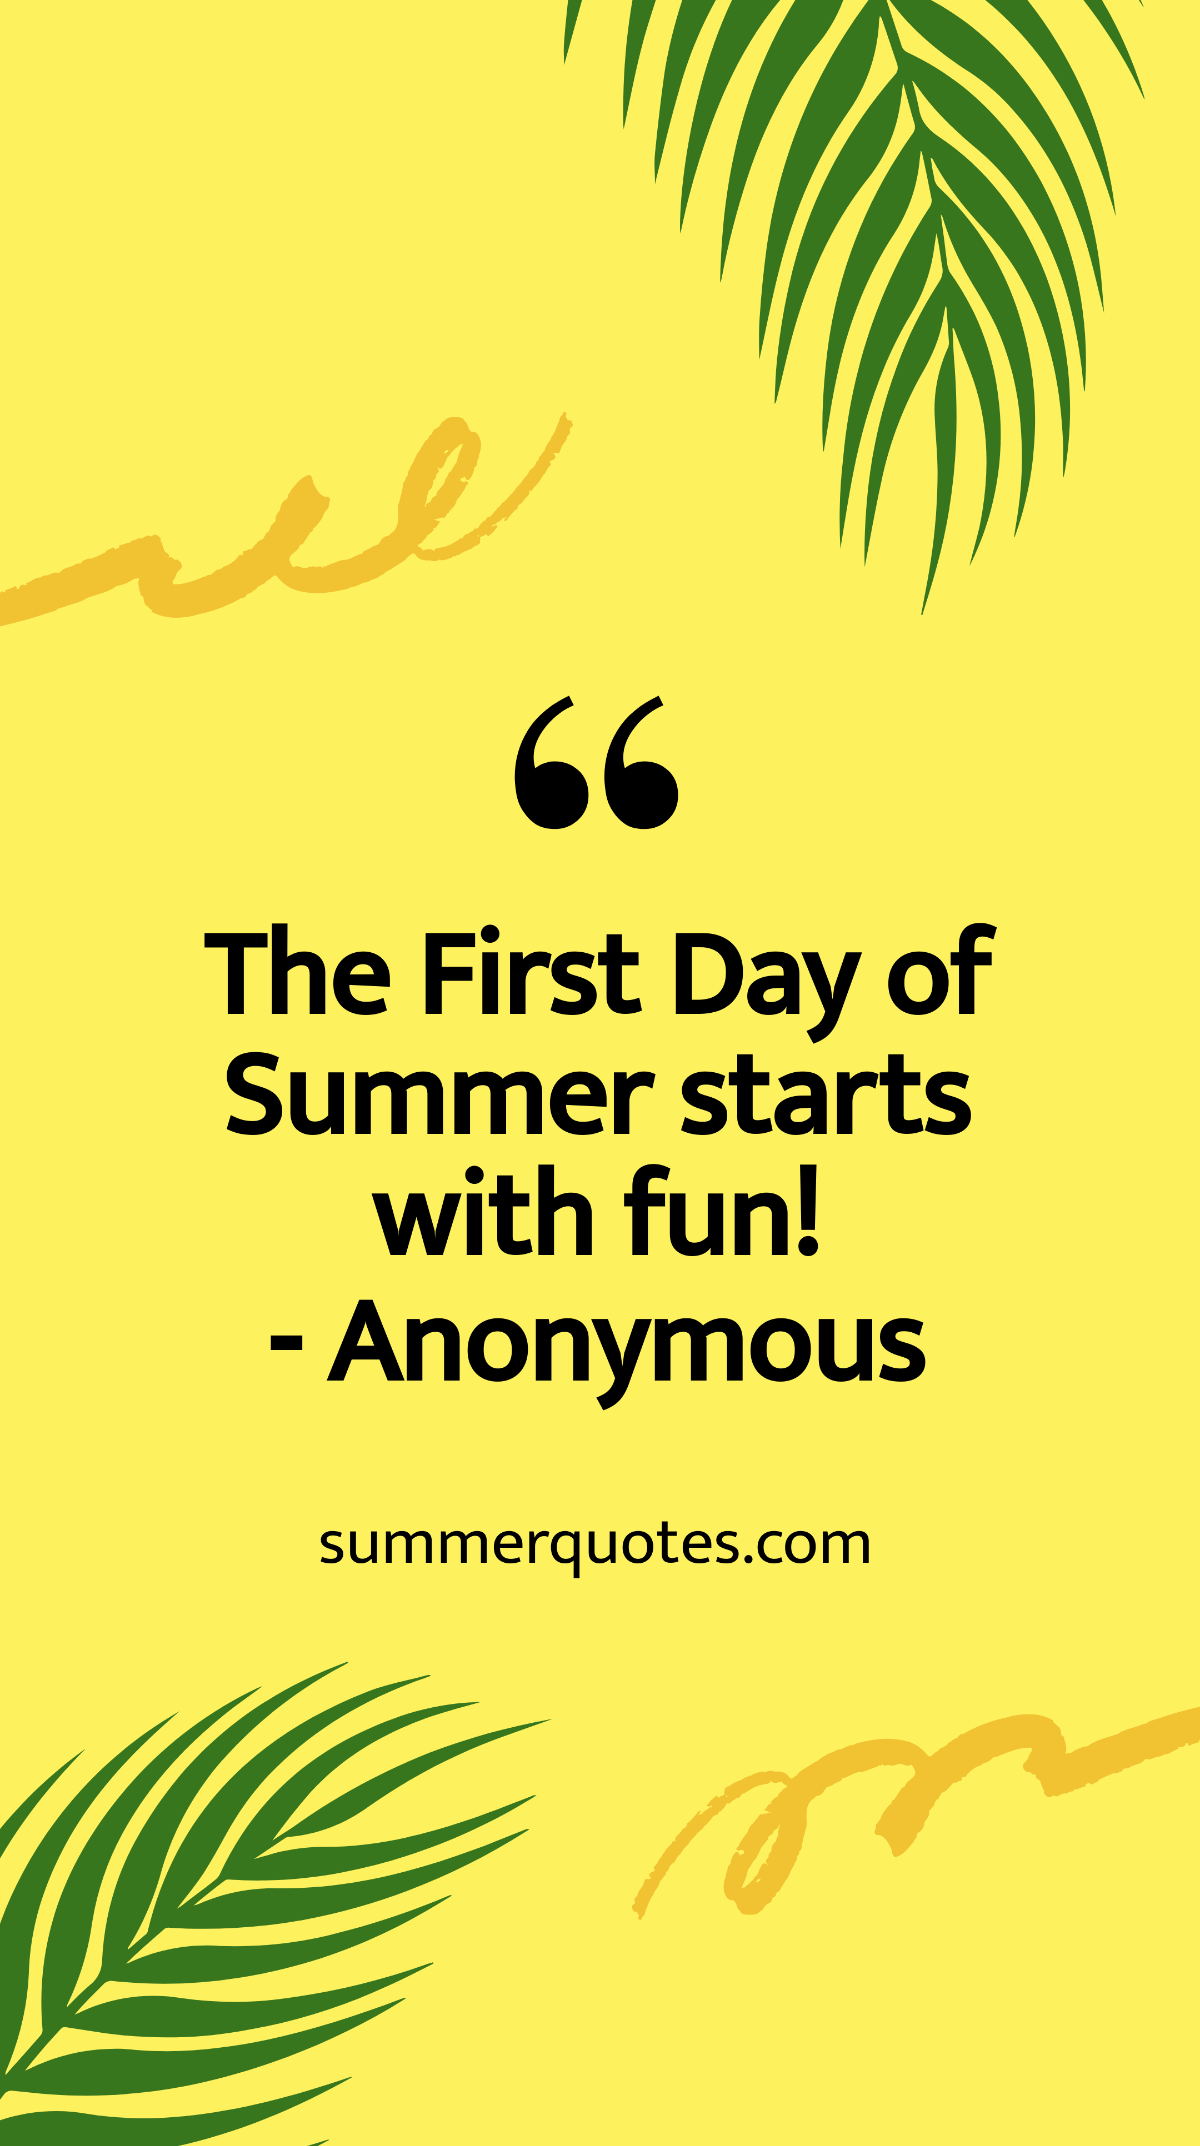 First Day of Summer Quote Whatsapp Post Template